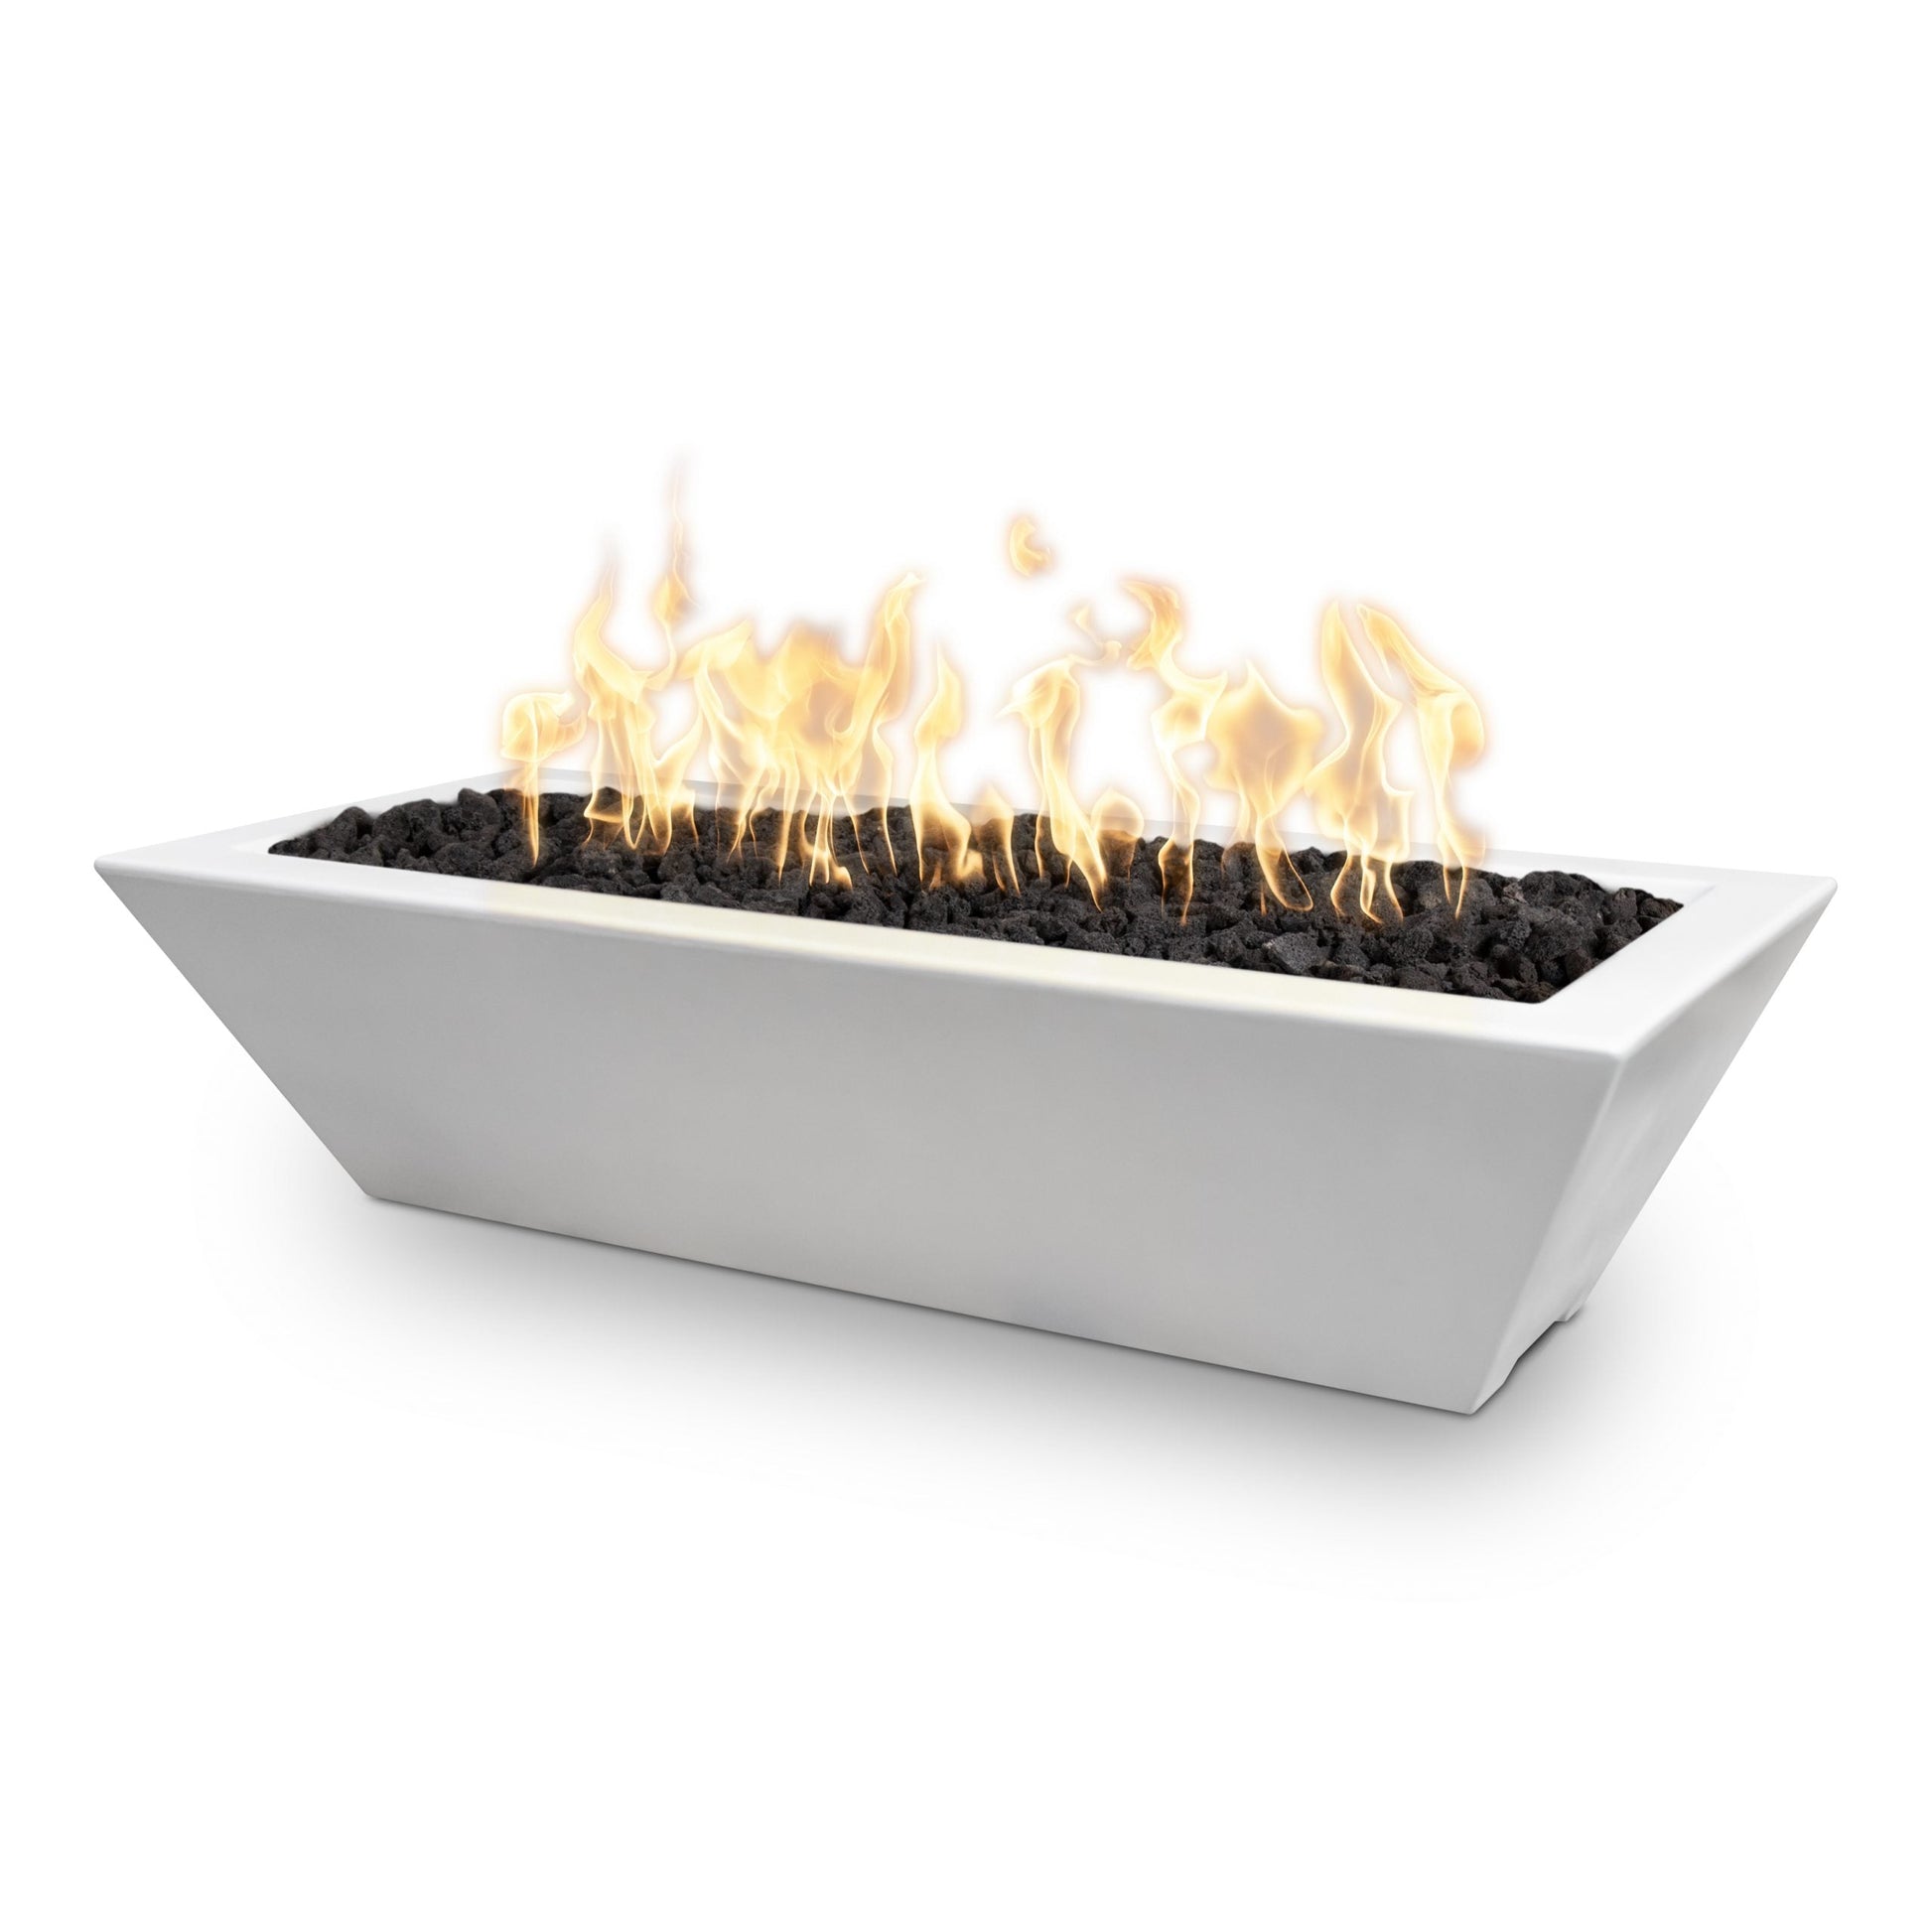 The Outdoor Plus Linear Maya 60" Black GFRC Concrete Liquid Propane Fire Bowl with Match Lit with Flame Sense Ignition